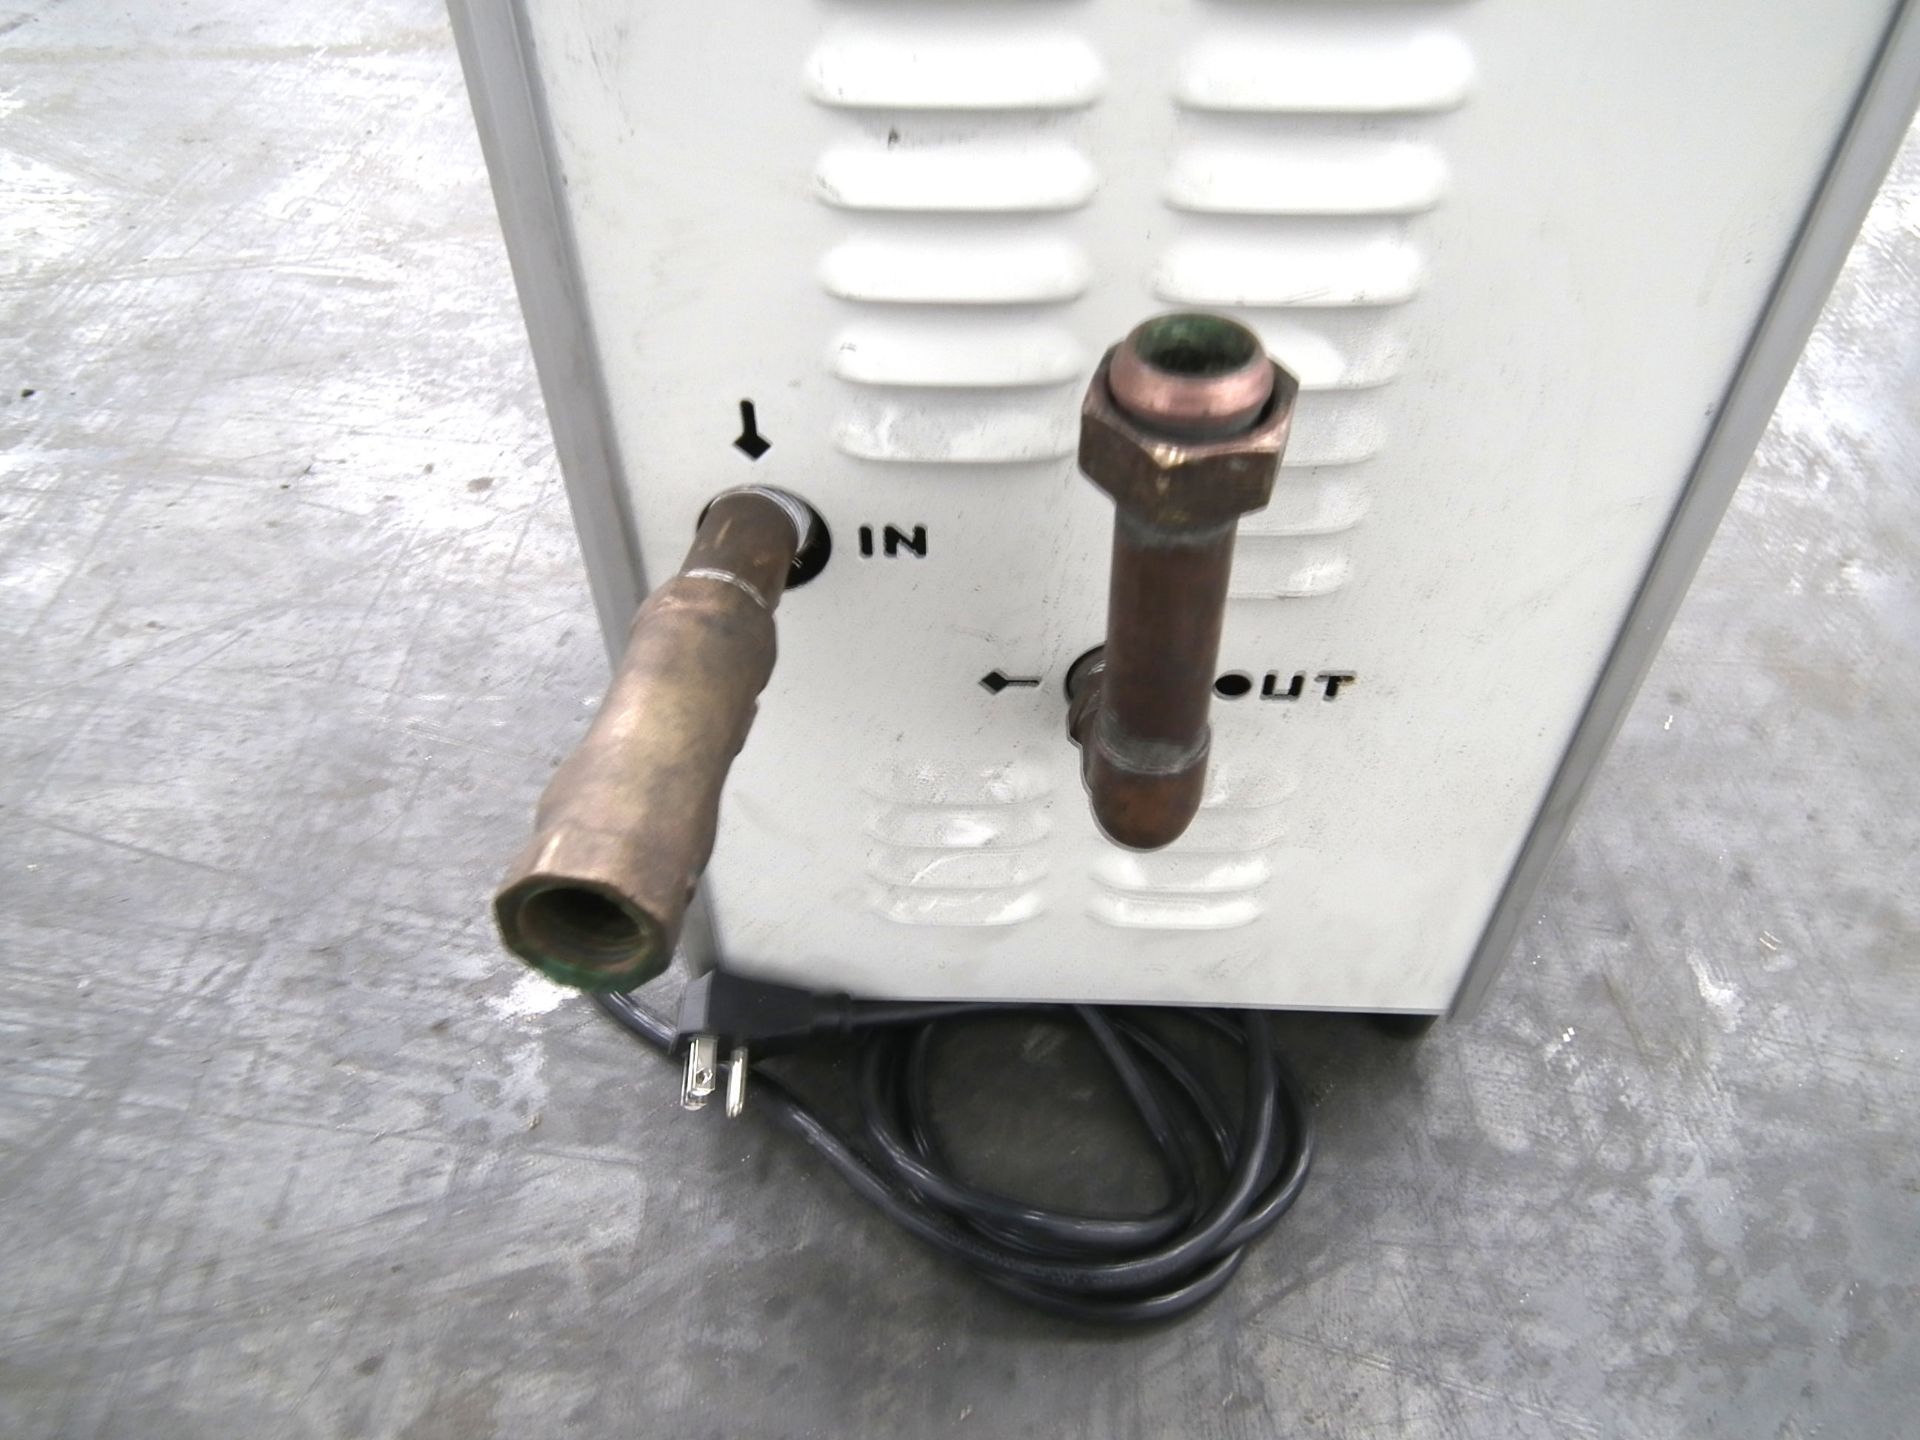 Saylor Beall SBRH-20-1 Compressed Air Dryer (Rigging Fee - $70) - Image 7 of 8